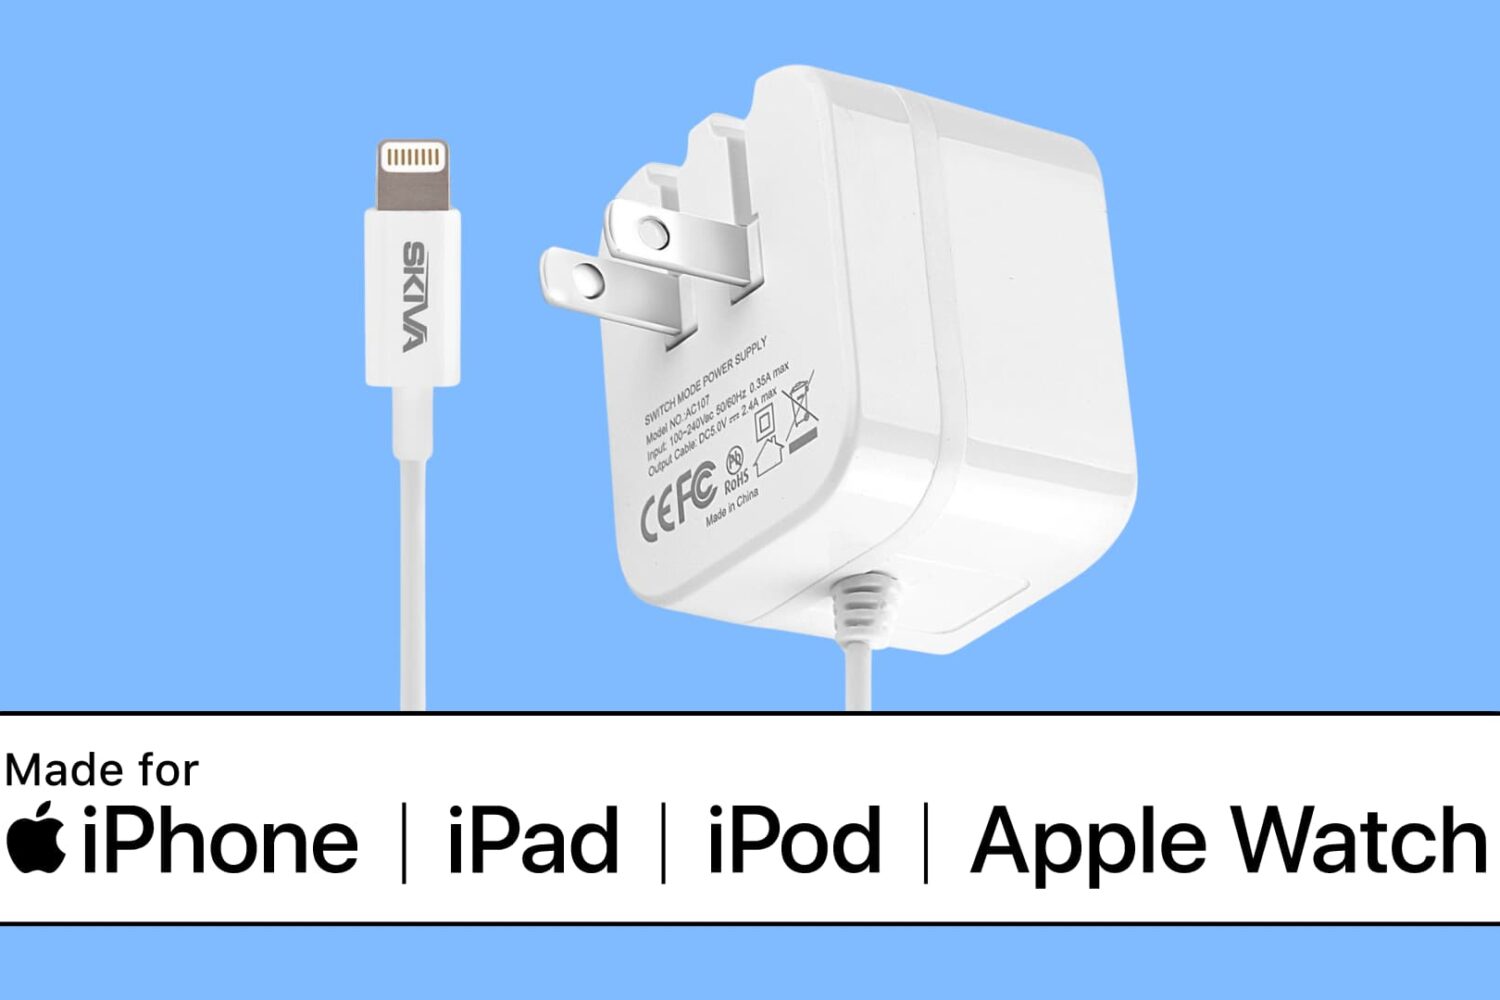 A charging cable and adapter with Made for iPhone badge under it